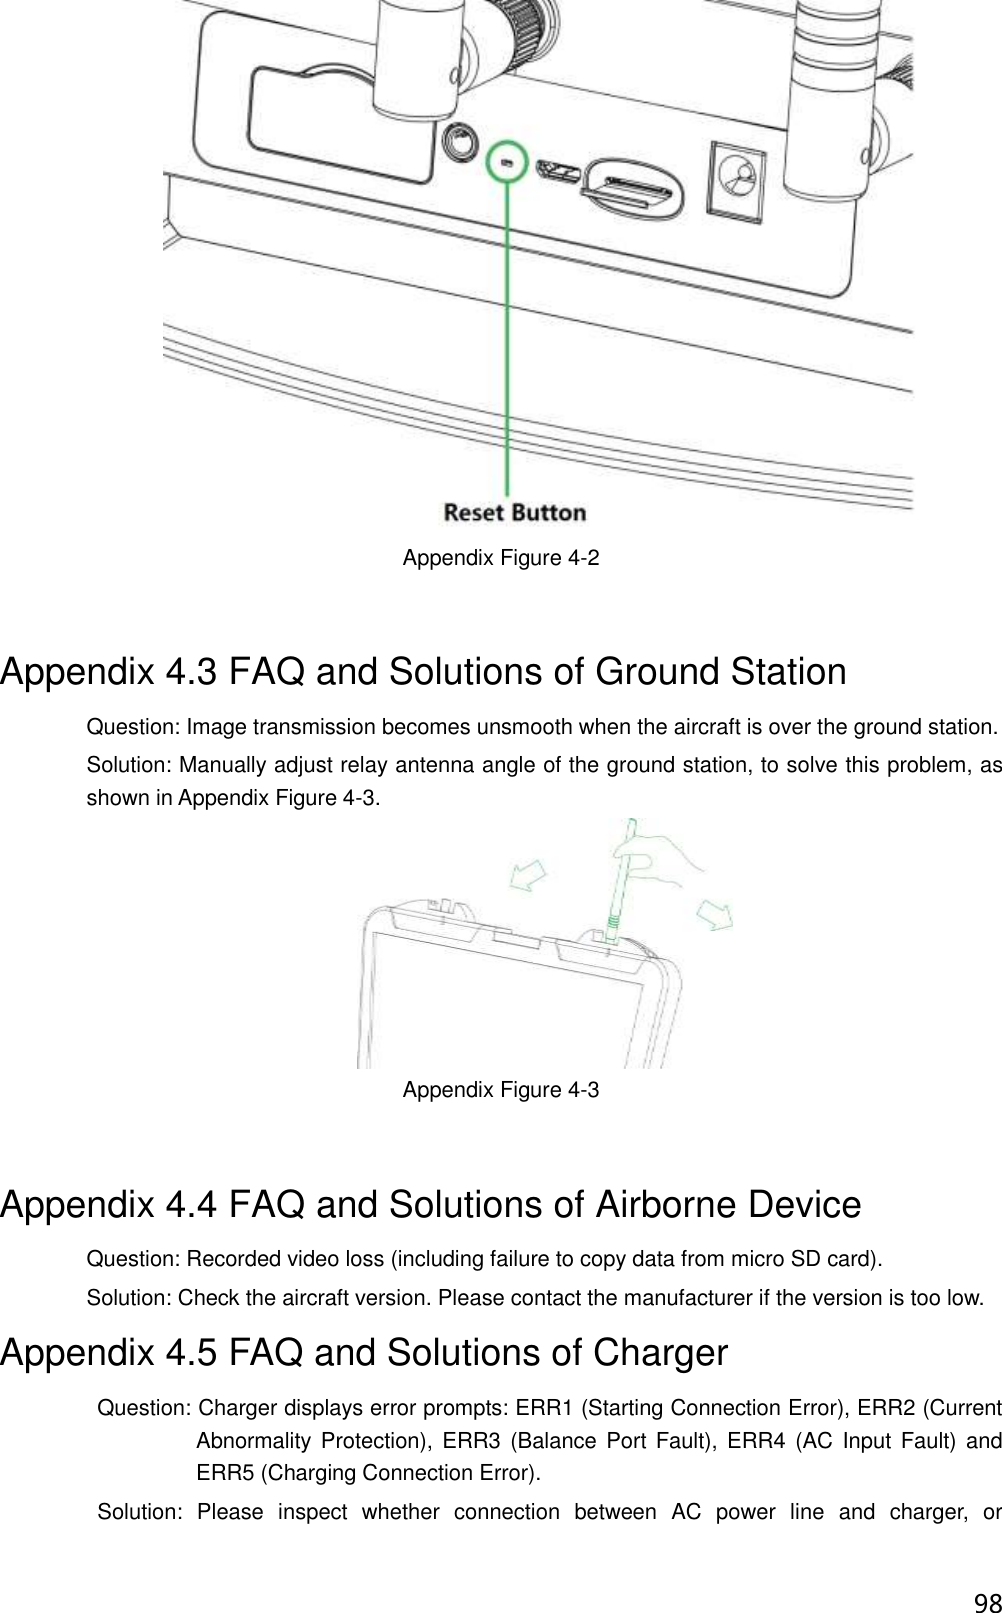  98  Appendix Figure 4-2 Appendix 4.3 FAQ and Solutions of Ground Station Question: Image transmission becomes unsmooth when the aircraft is over the ground station. Solution: Manually adjust relay antenna angle of the ground station, to solve this problem, as shown in Appendix Figure 4-3.  Appendix Figure 4-3 Appendix 4.4 FAQ and Solutions of Airborne Device Question: Recorded video loss (including failure to copy data from micro SD card). Solution: Check the aircraft version. Please contact the manufacturer if the version is too low. Appendix 4.5 FAQ and Solutions of Charger                   Question: Charger displays error prompts: ERR1 (Starting Connection Error), ERR2 (Current Abnormality  Protection), ERR3 (Balance Port  Fault), ERR4  (AC Input  Fault) and ERR5 (Charging Connection Error).                   Solution:  Please  inspect  whether  connection  between  AC  power  line  and  charger,  or 